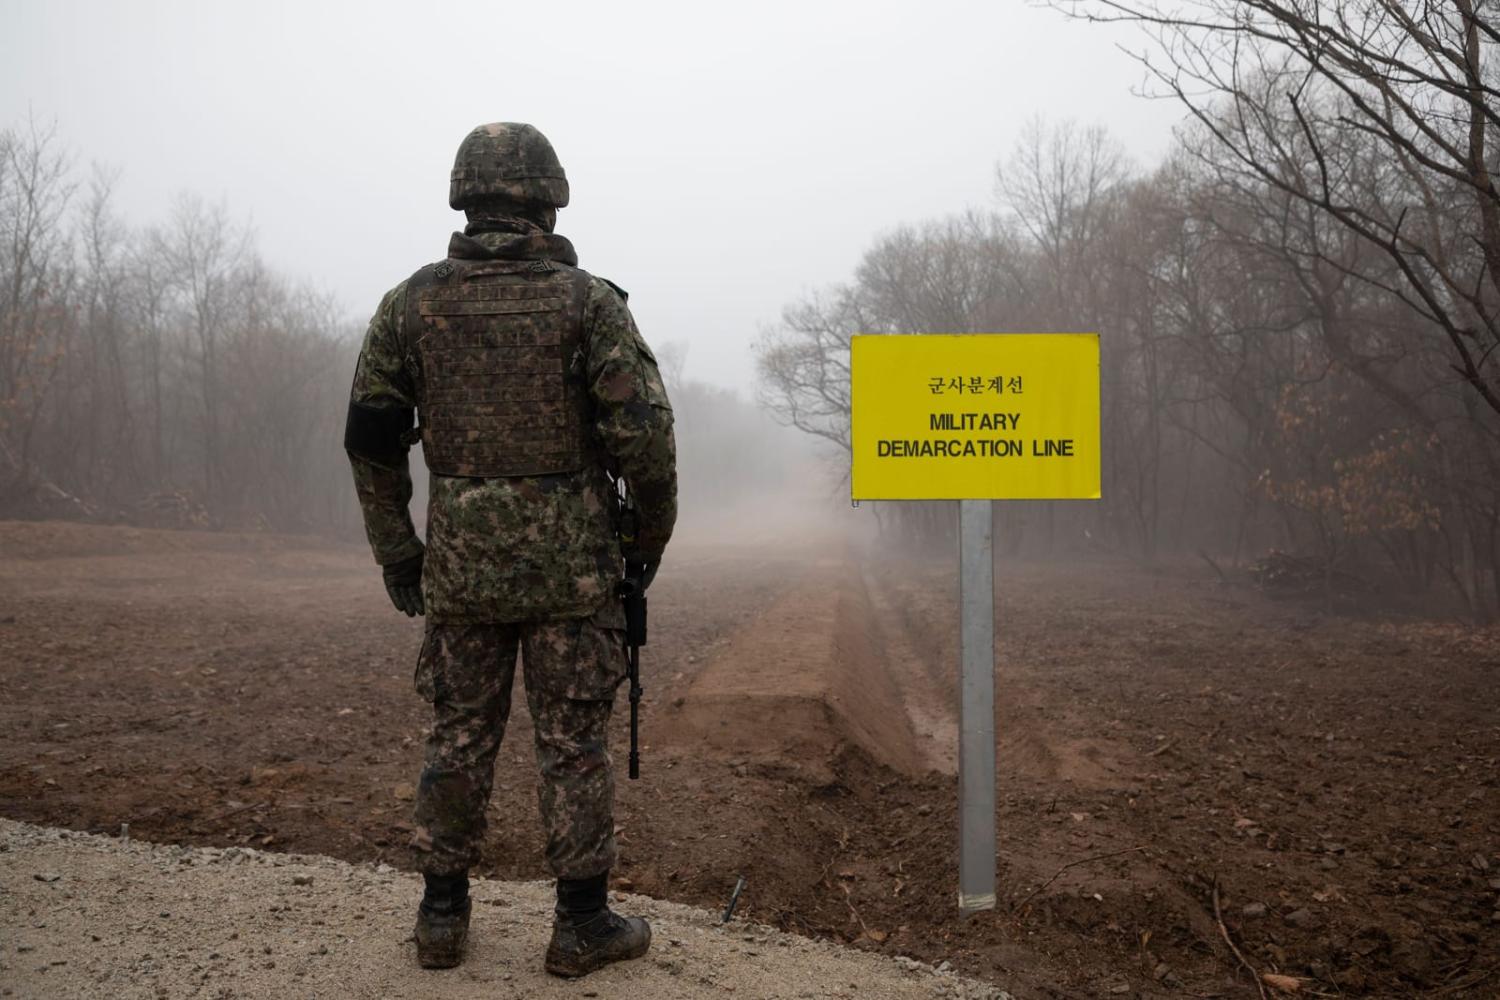 A South Korean soldier stands before the Military Demarcation Line (MDL) separating North and South Korea (Yelim Lee/AFP via Getty Images)